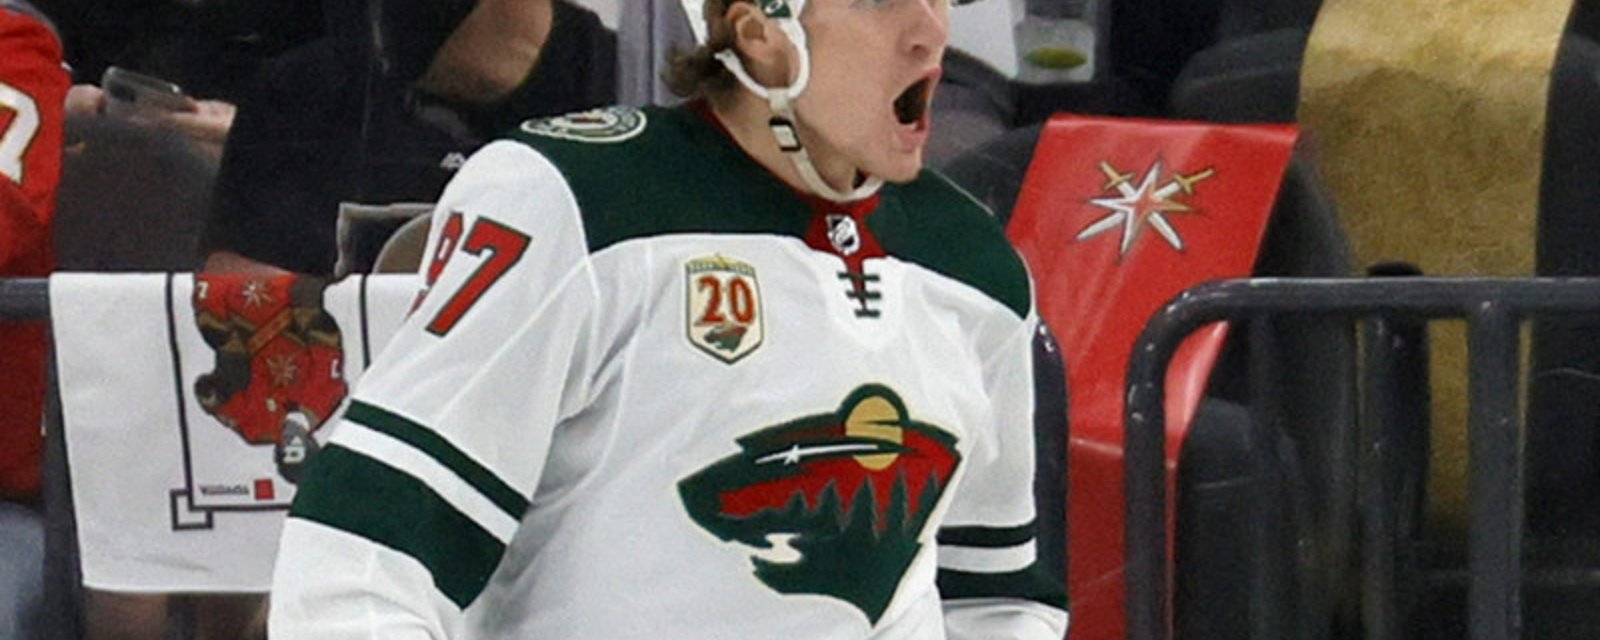 Wild signs Kaprizov to hefty contract after 6 months of contentious contract talks